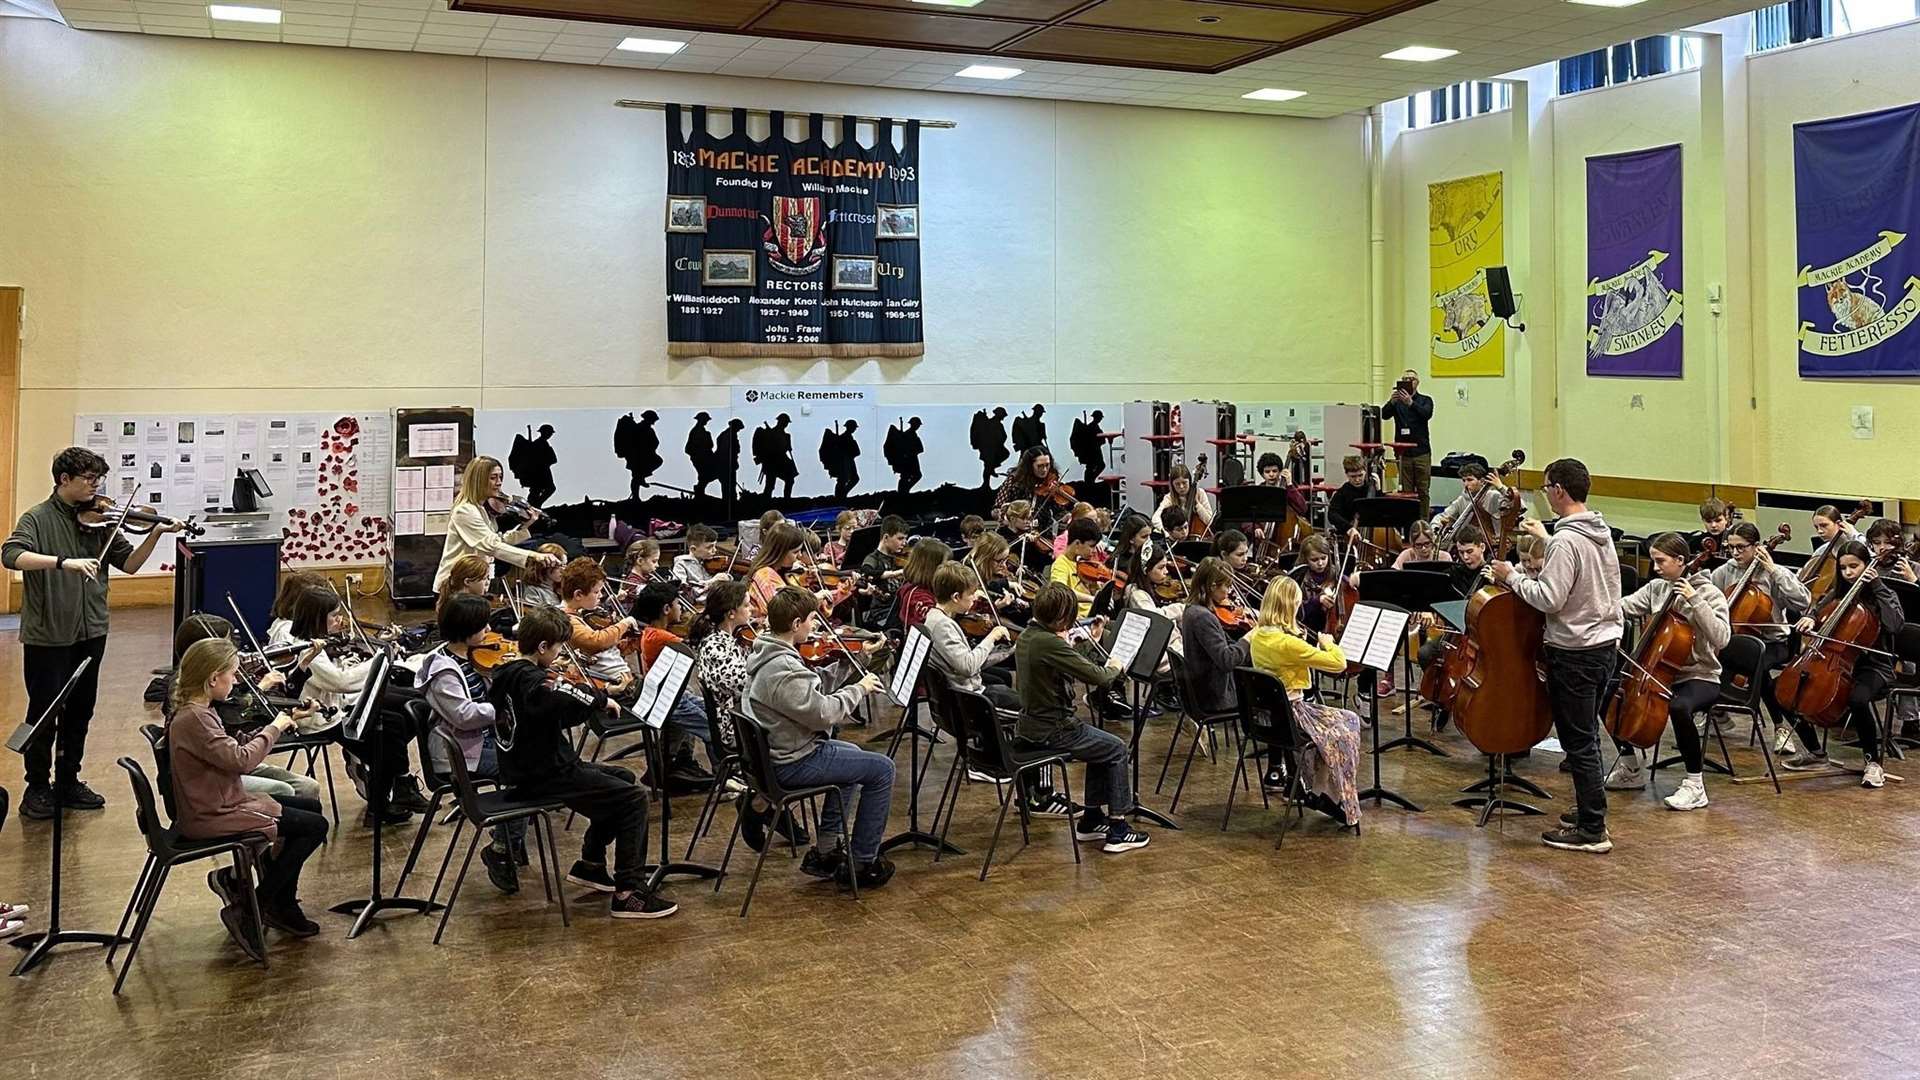 AYMS has provided performance opportunities for young musicians in Aberdeenshire.